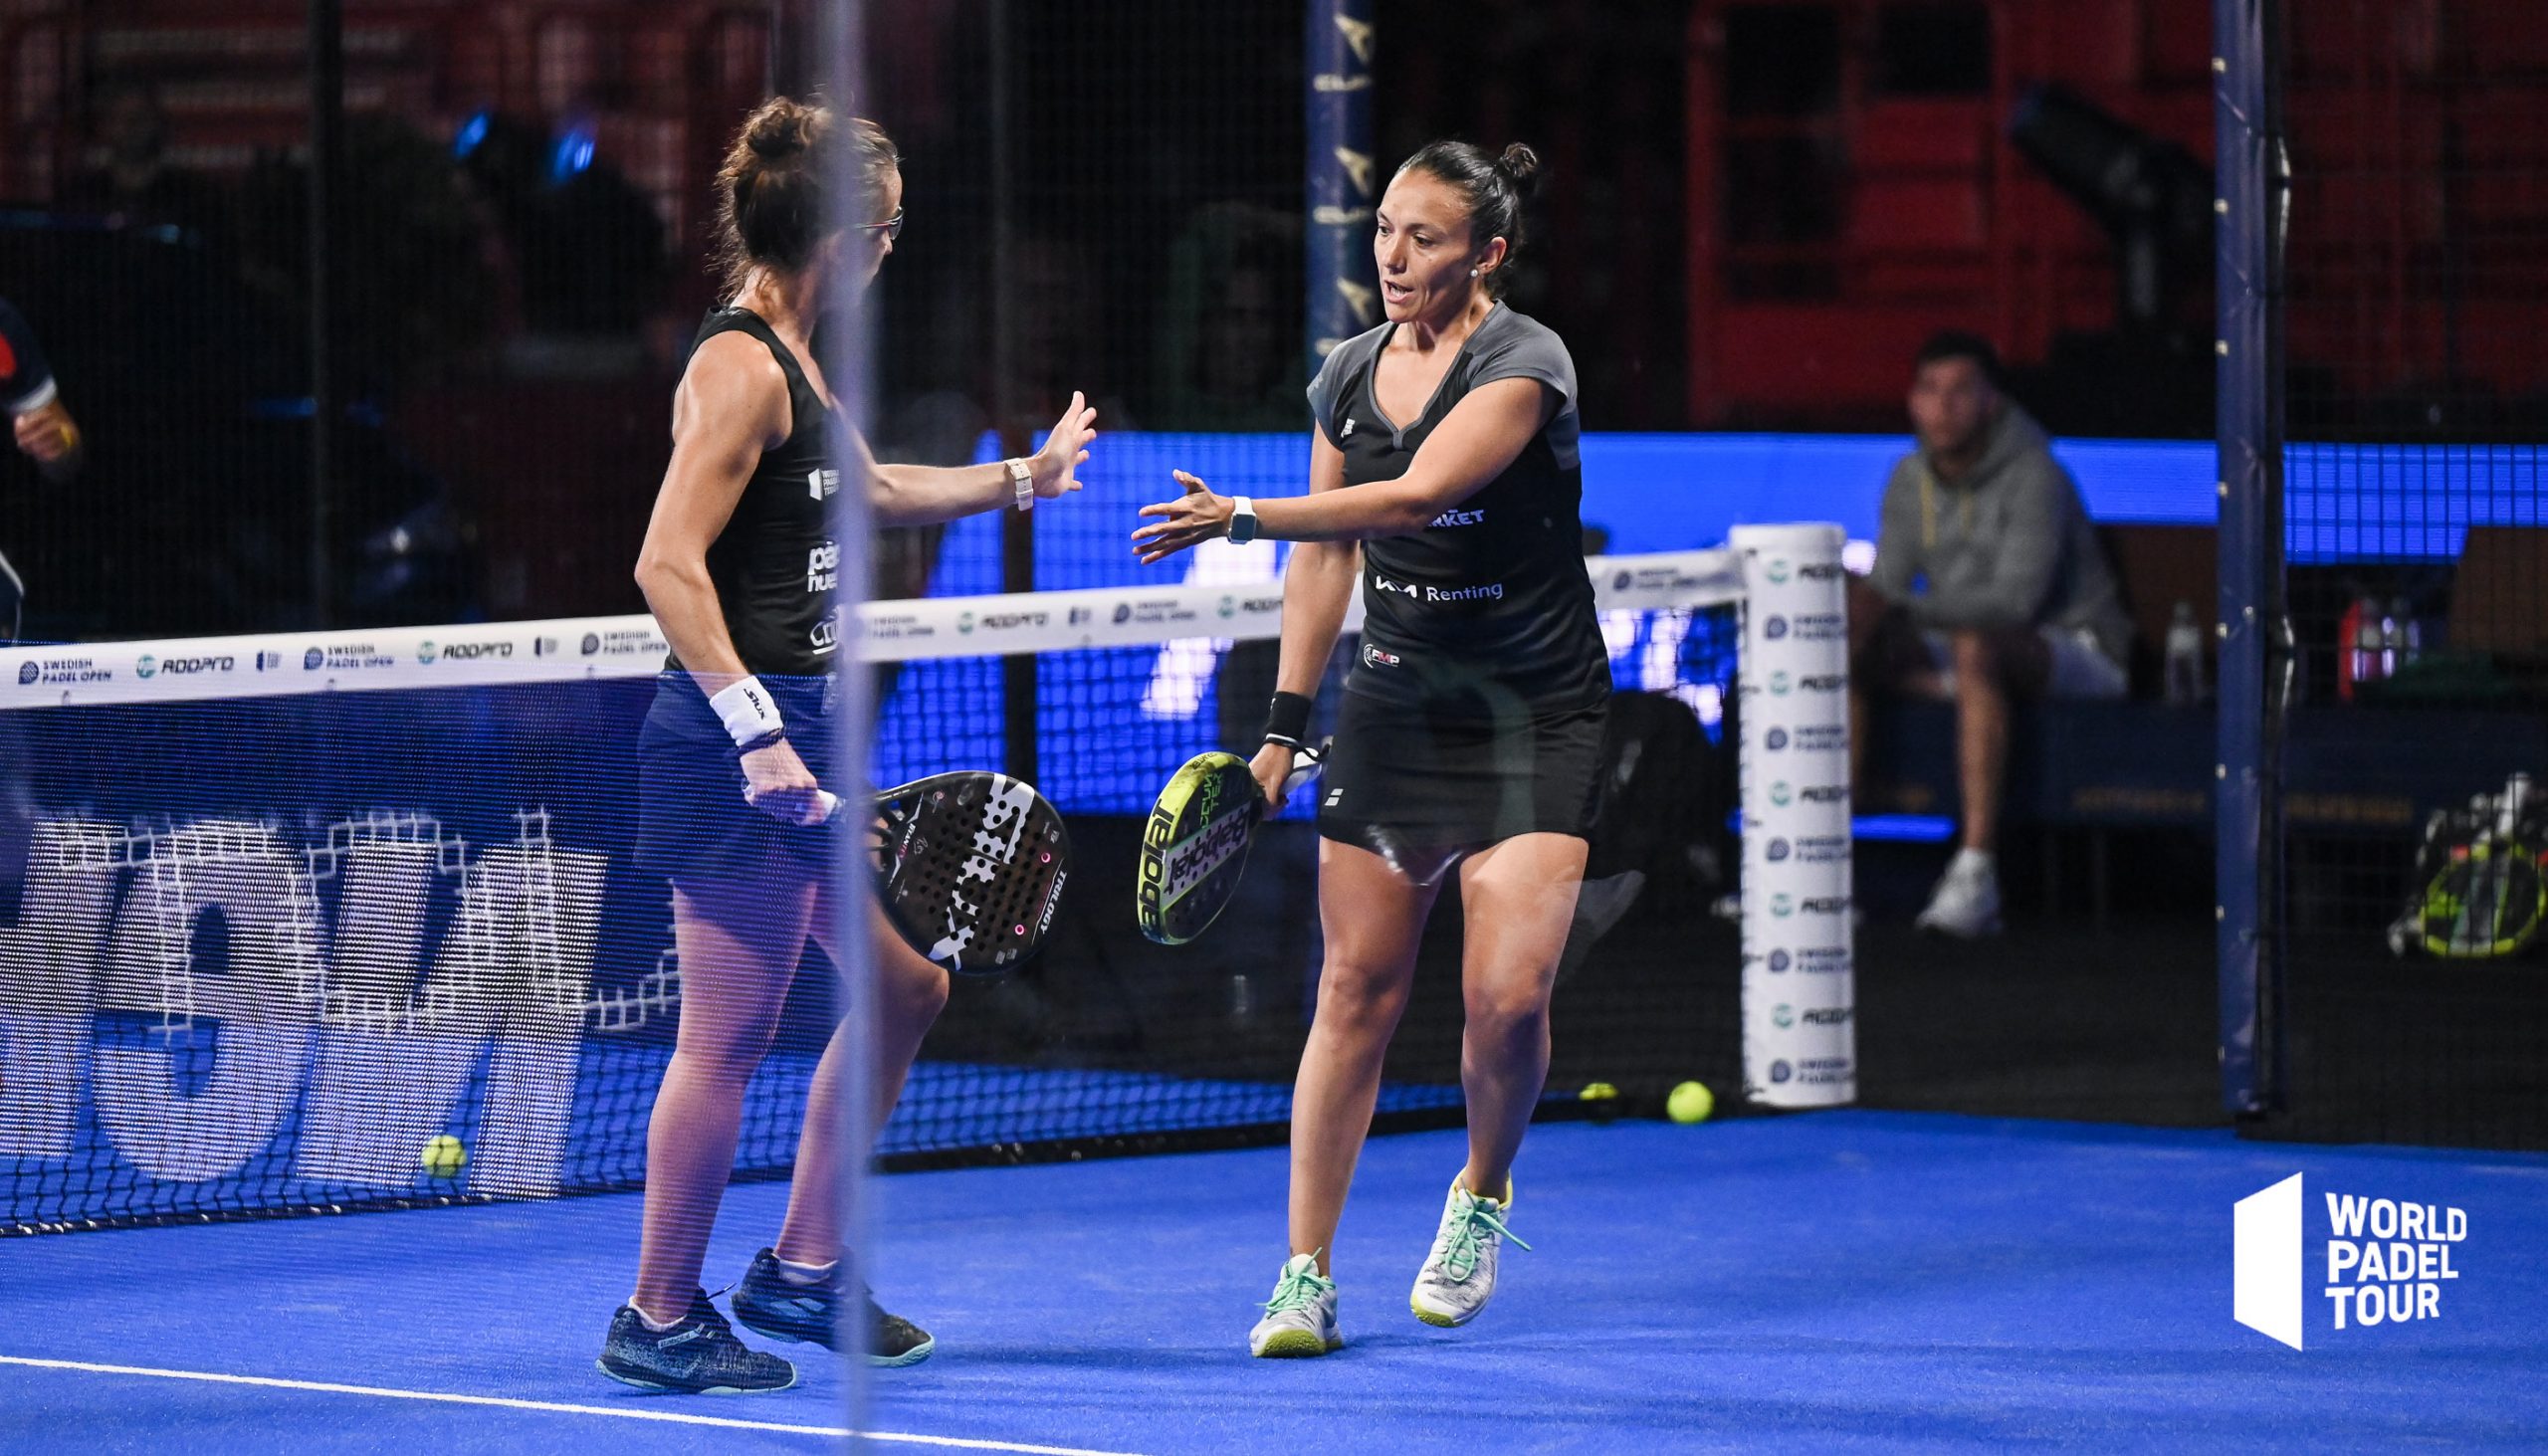 Local couple gives Riera and Llaguno problems in Swedish Padel Open round of 32